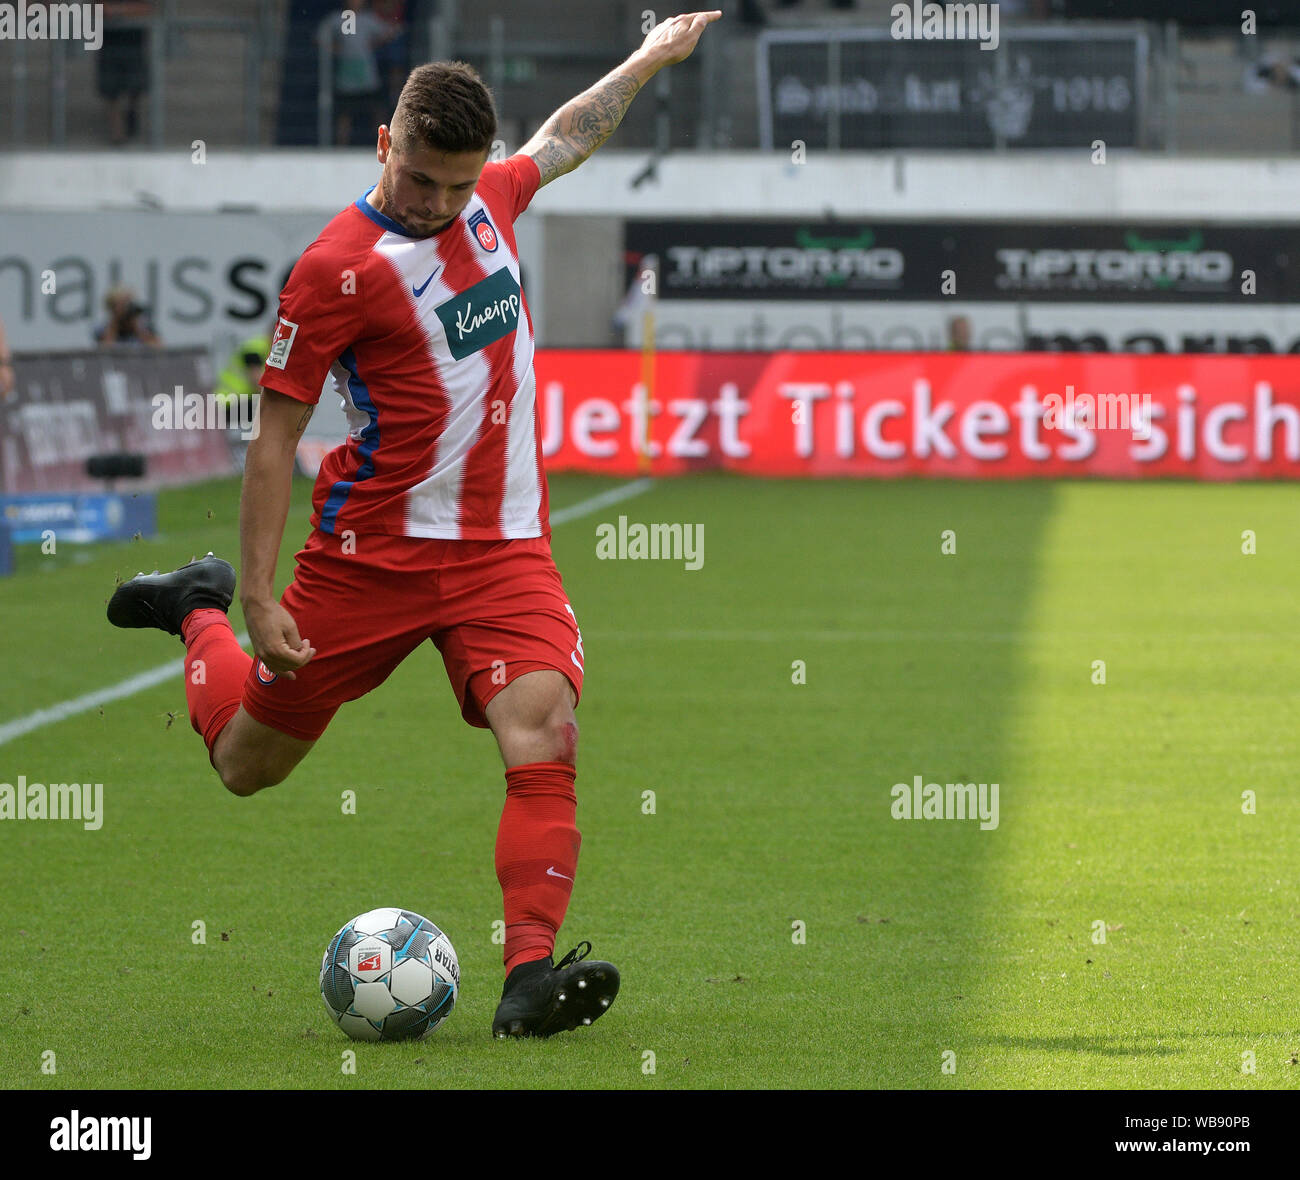 Heidenheim, Germany. 25th Aug, 2019. Soccer: 2nd Bundesliga, 1st FC Heidenheim - SV Sandhausen, 4th matchday in the Voith Arena. Heidenheim's Marnon Busch plays the ball. Credit: Stefan Puchner/dpa - IMPORTANT NOTE: In accordance with the requirements of the DFL Deutsche Fußball Liga or the DFB Deutscher Fußball-Bund, it is prohibited to use or have used photographs taken in the stadium and/or the match in the form of sequence images and/or video-like photo sequences./dpa/Alamy Live News Stock Photo